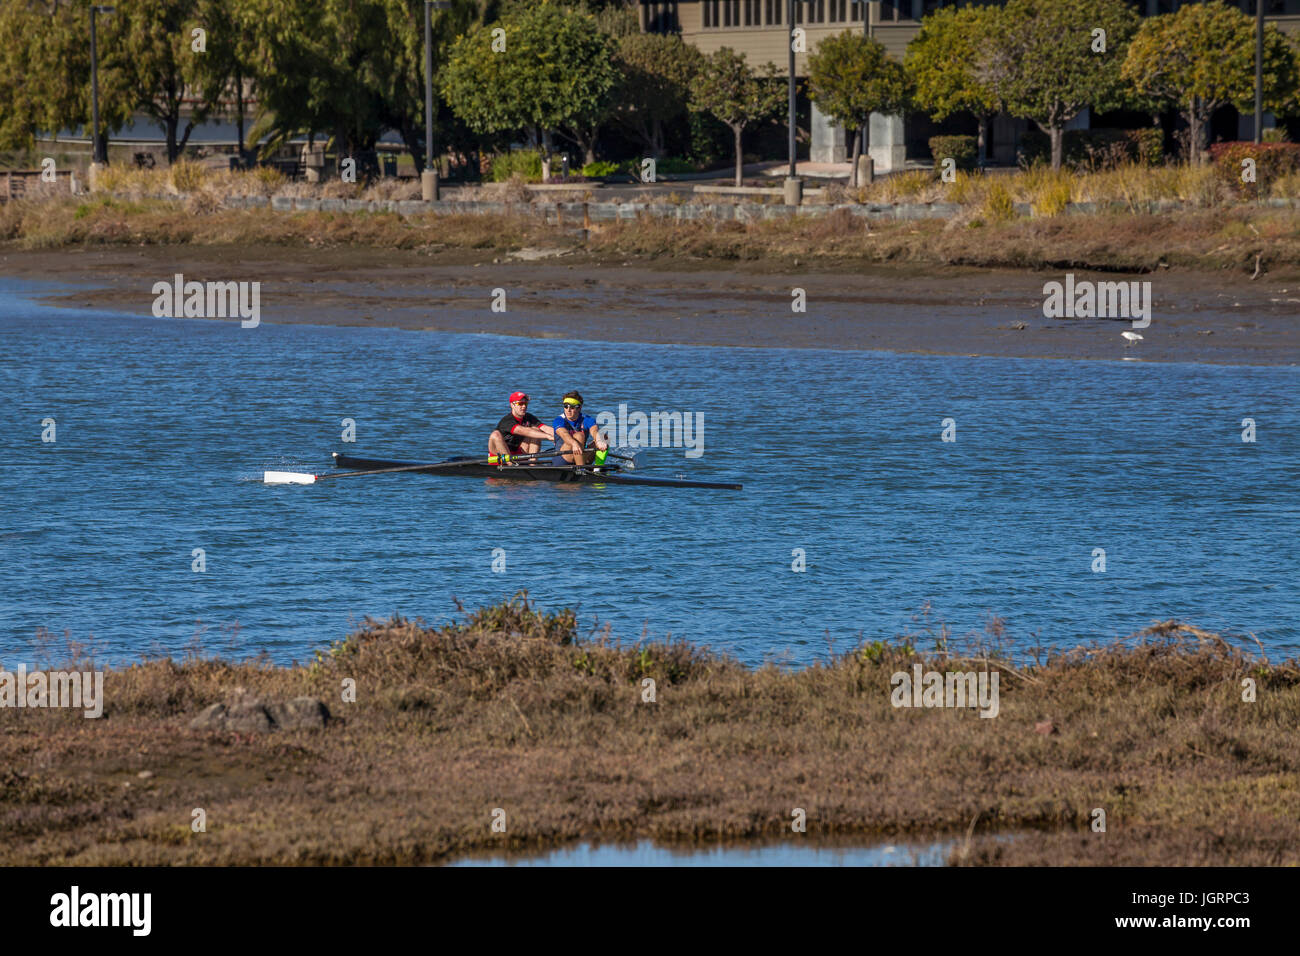 Two men rowing in the inlet of Larkspur Creek, Larkspur, California, USA Stock Photo